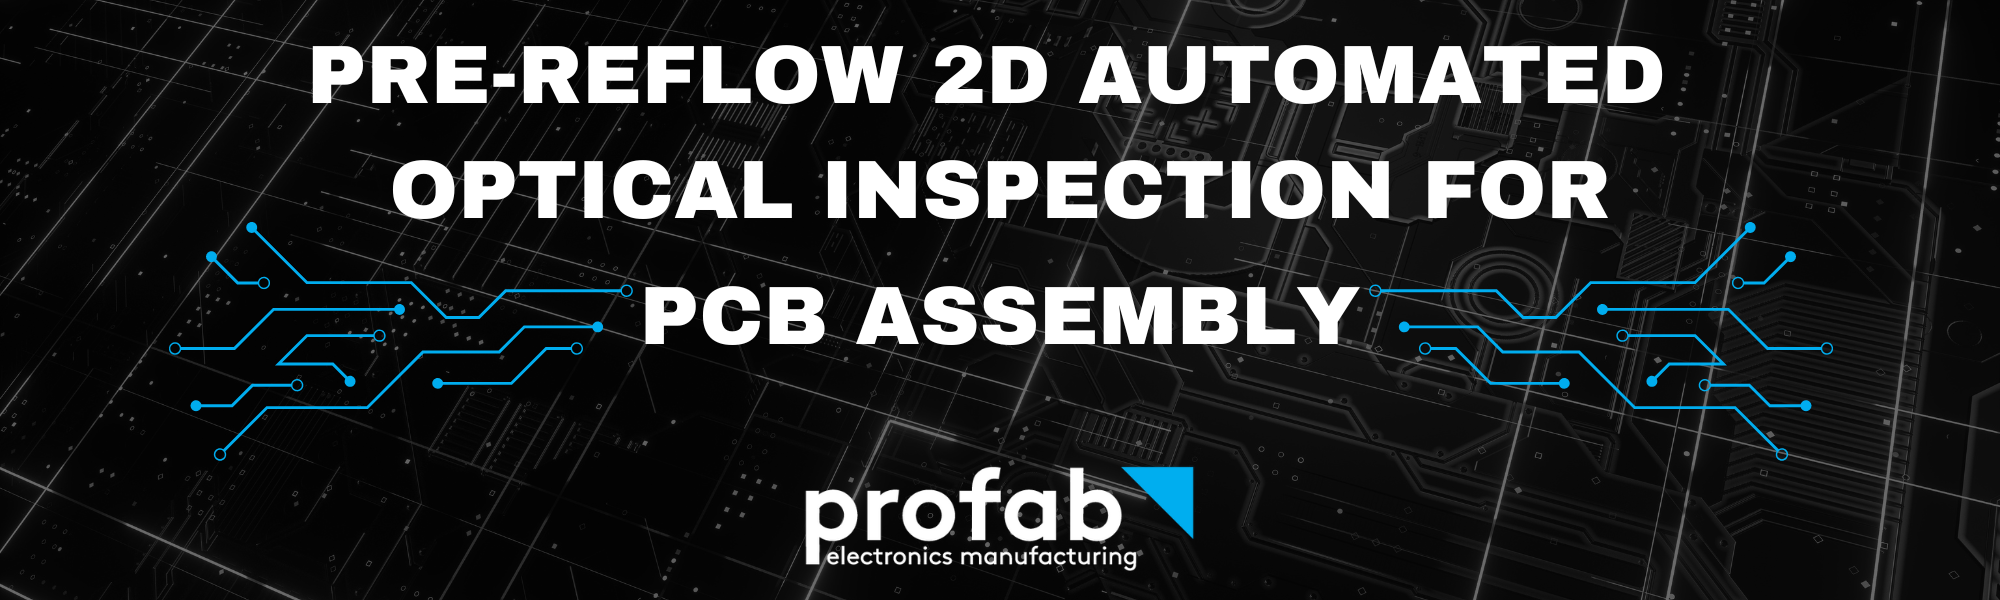 Pre-Reflow 2D Automated Optical Inspection